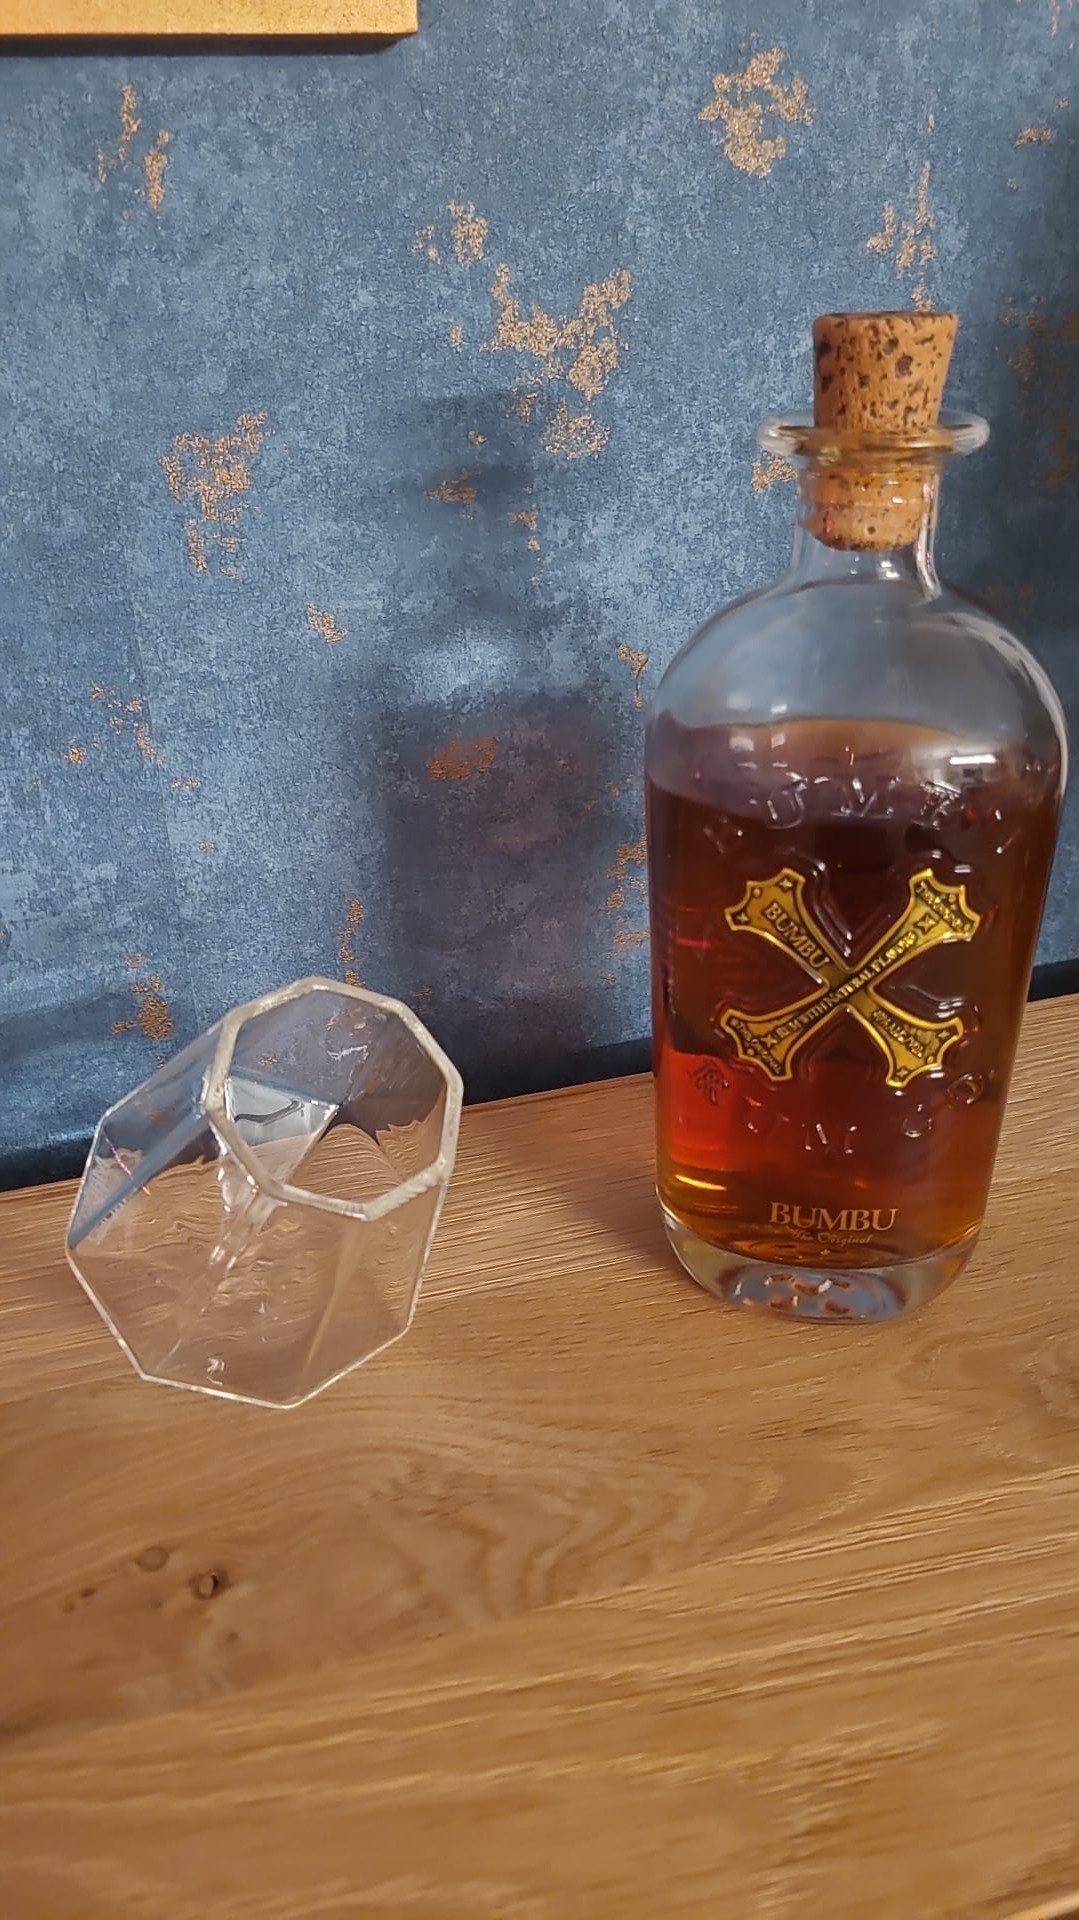 Photo of the bottle taken from user Beach-and-Rum